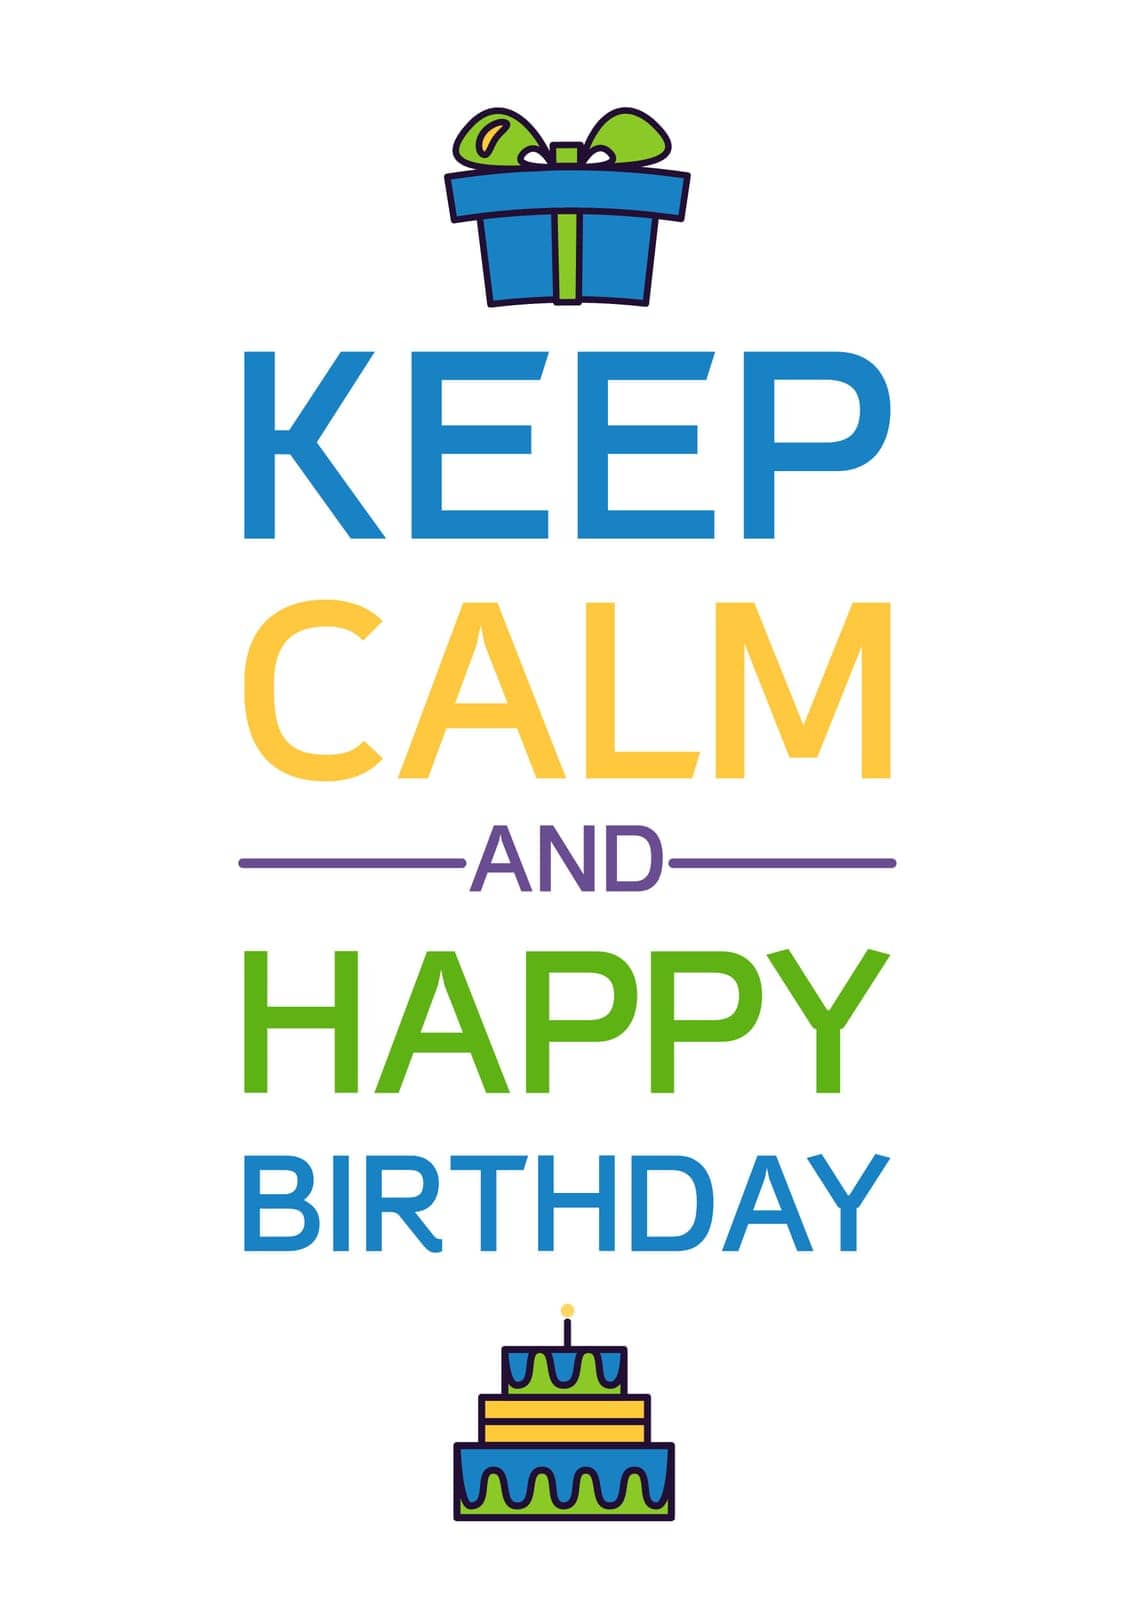 Happy Birthday And Keep Calm by barsrsind